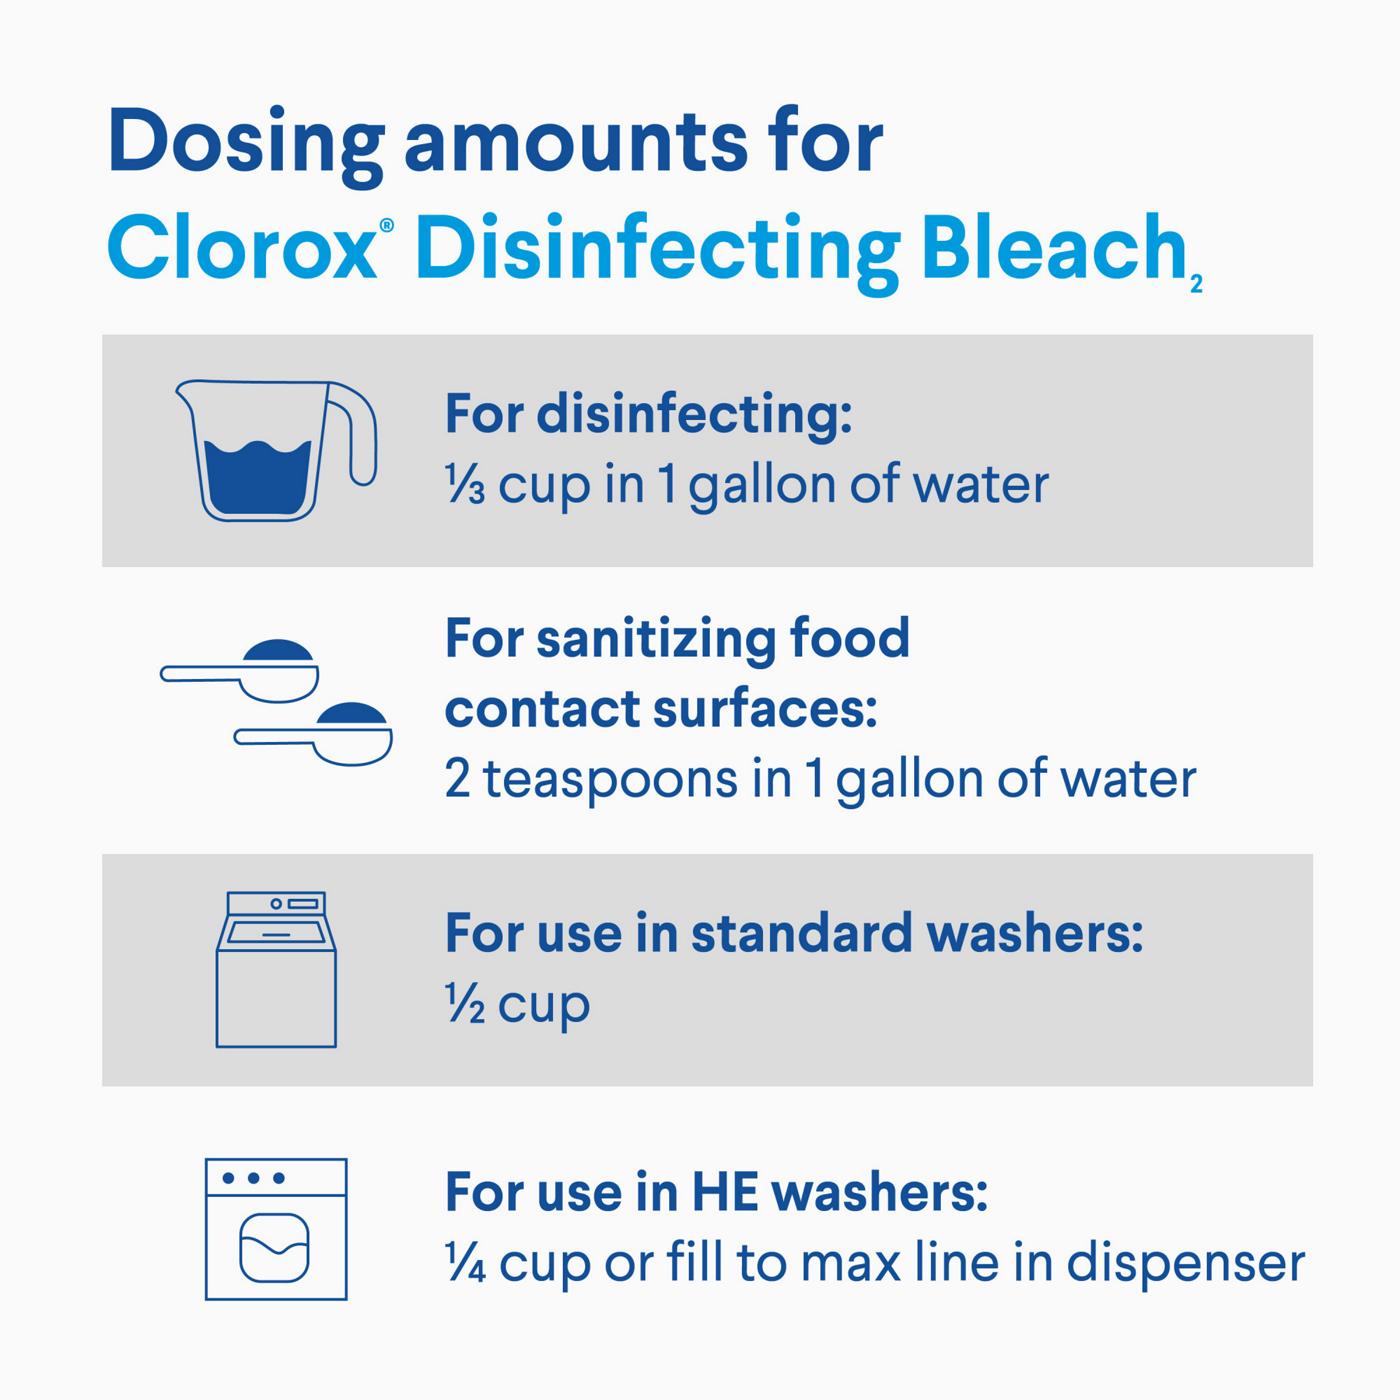 Clorox Disinfecting Bleach; image 7 of 7